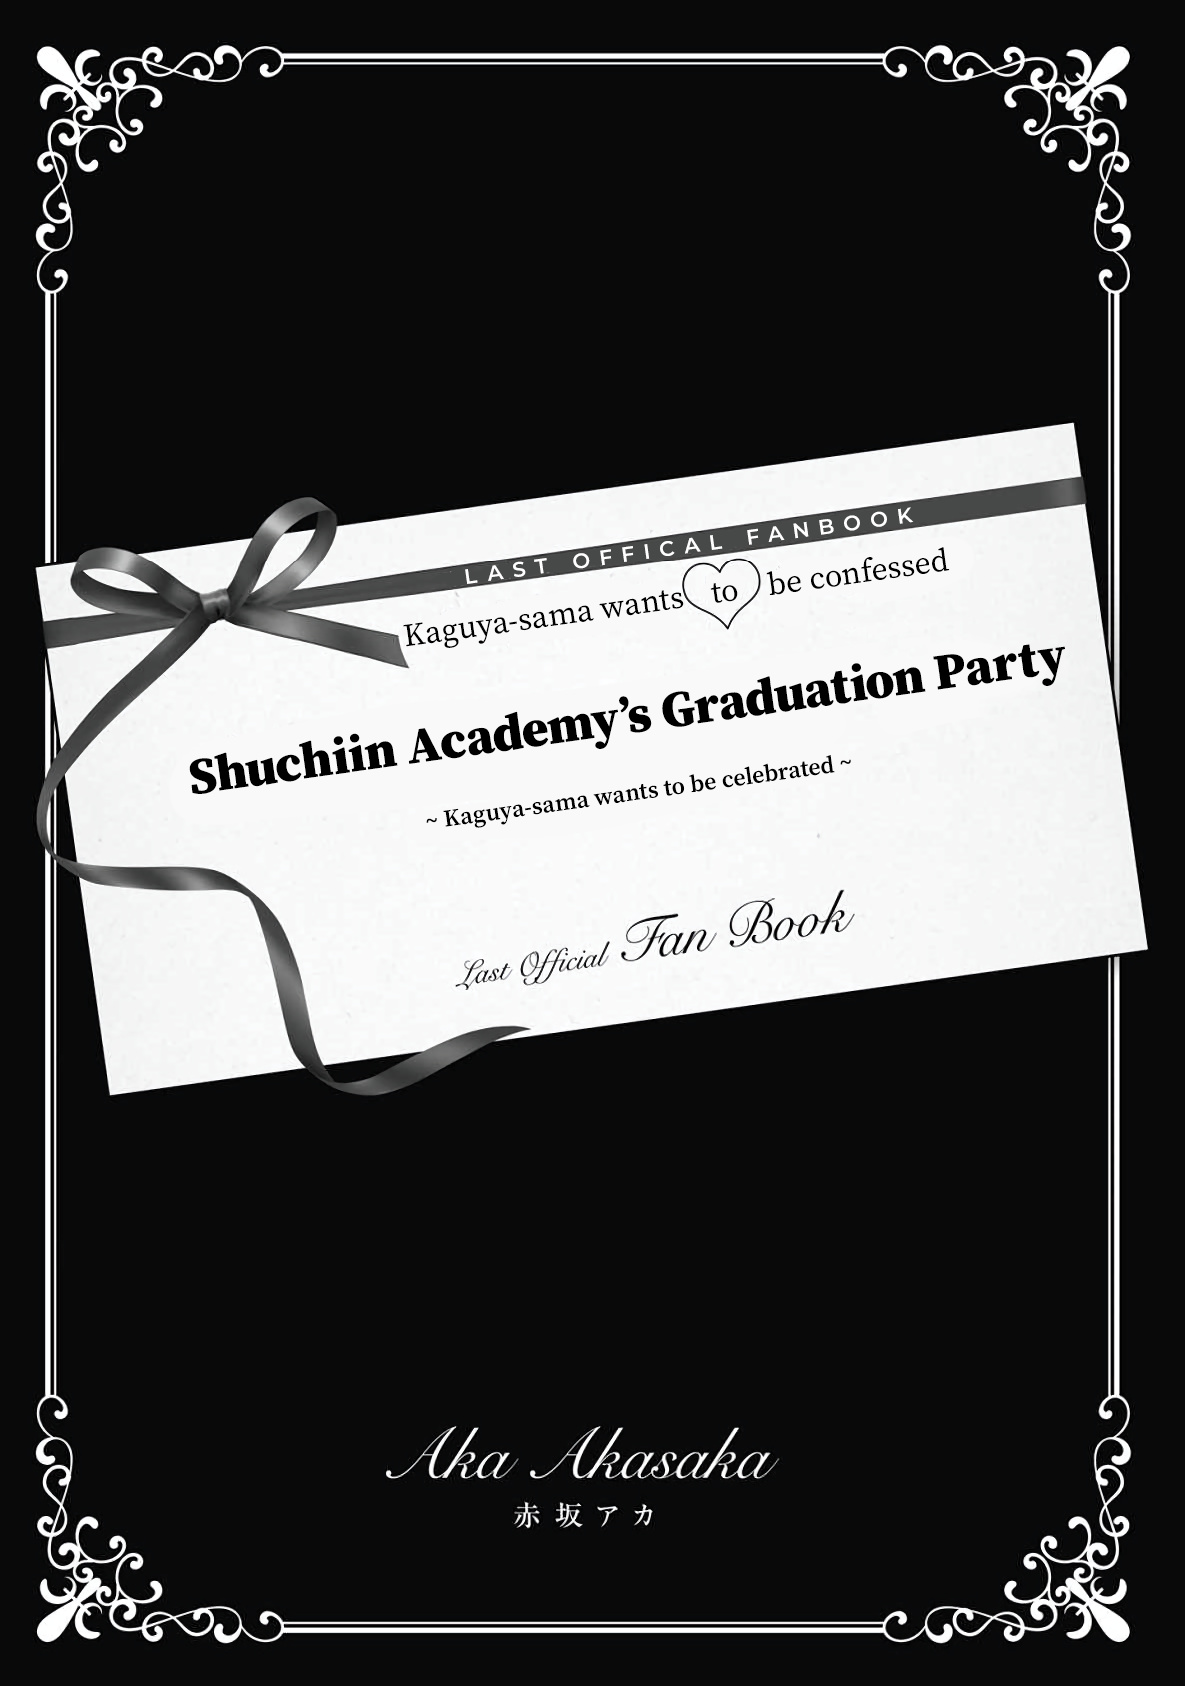 Shuchiin Academy’S Graduation Party ~Kaguya-Sama Wants To Be Celebrated~: Last Official Fanbook Chapter 0: Preface - Picture 2